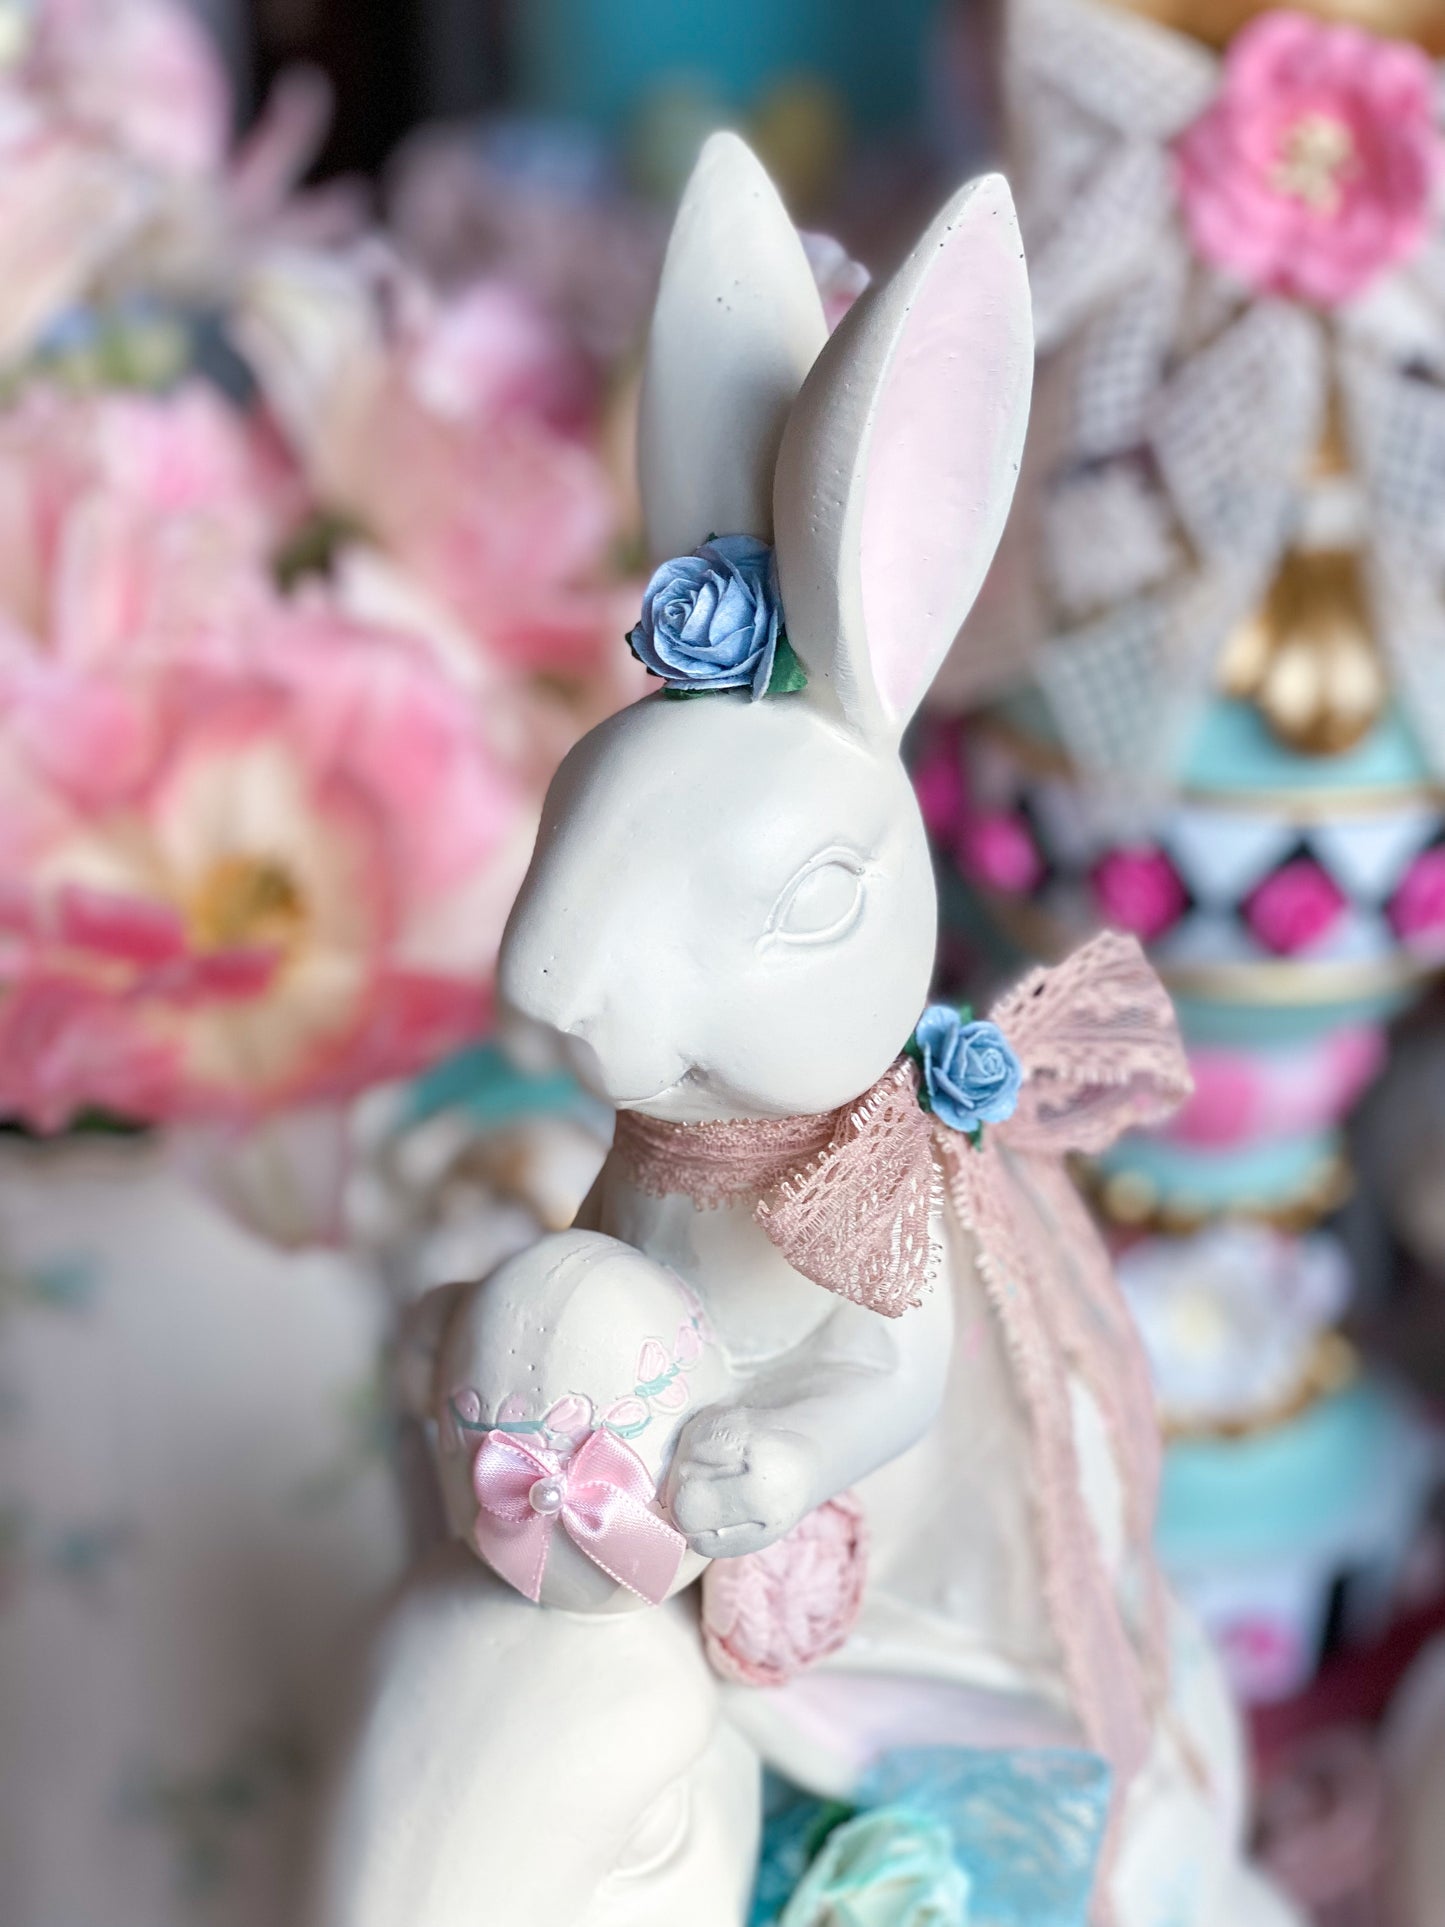 Bespoke Pastel Pink, Blue and Teal Stacked Bunnies with Flowers and Vintage Ribbon